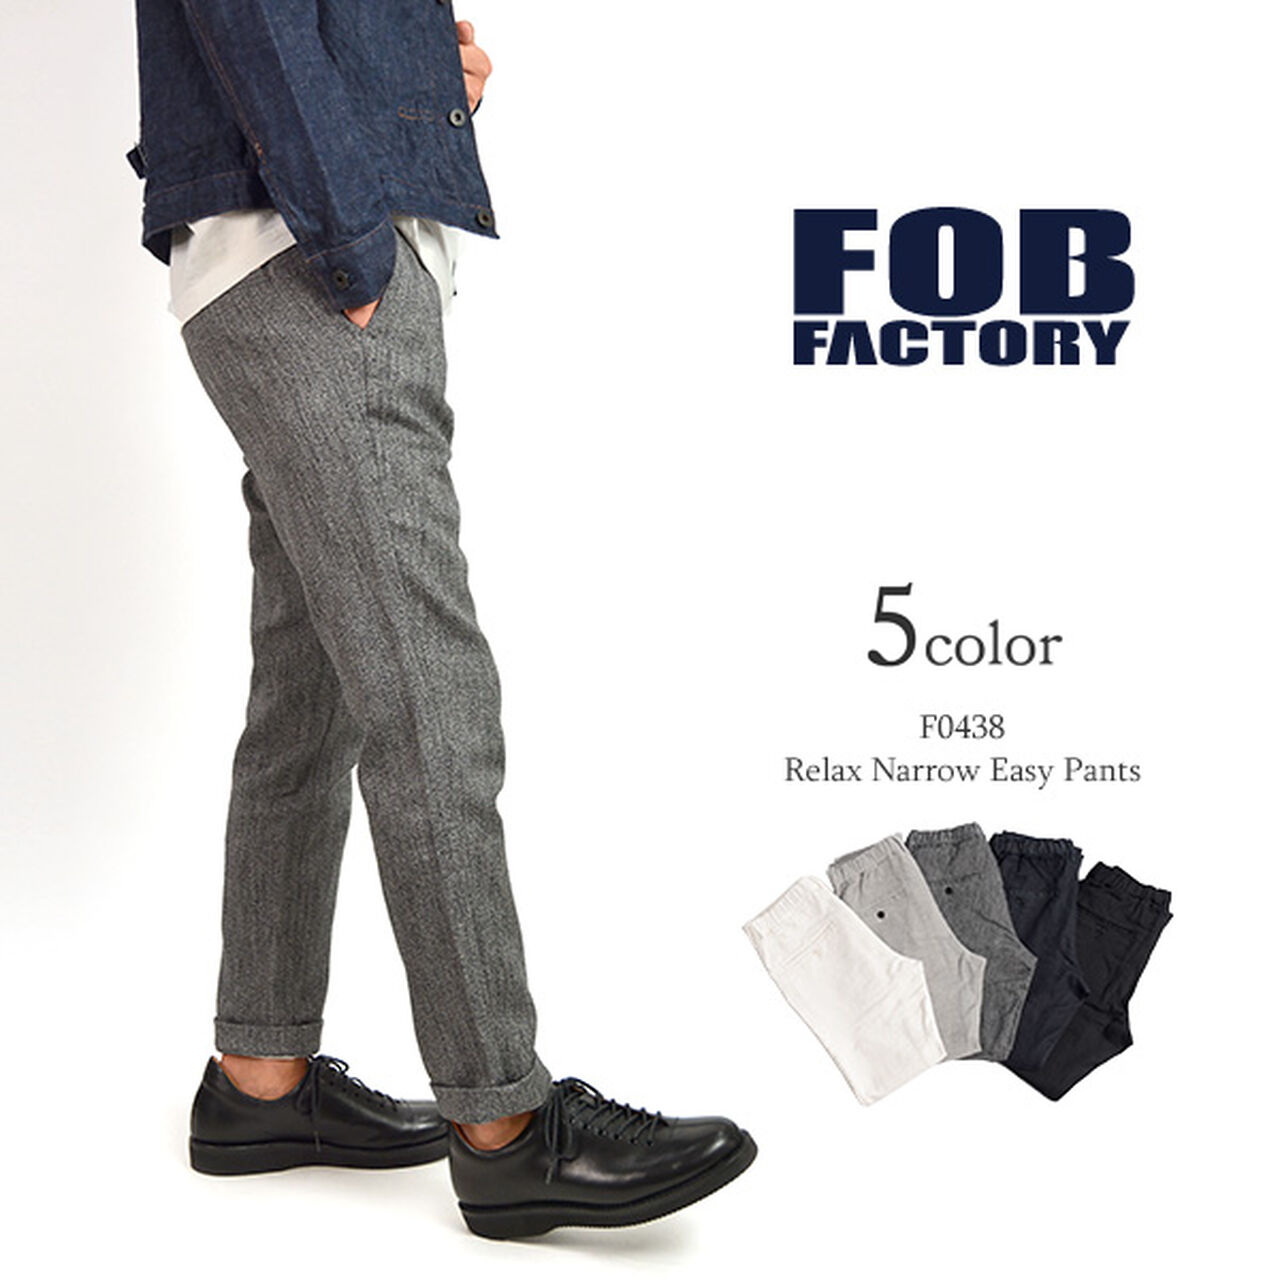 F0438 Relaxed Narrow Easy Pants,, large image number 0